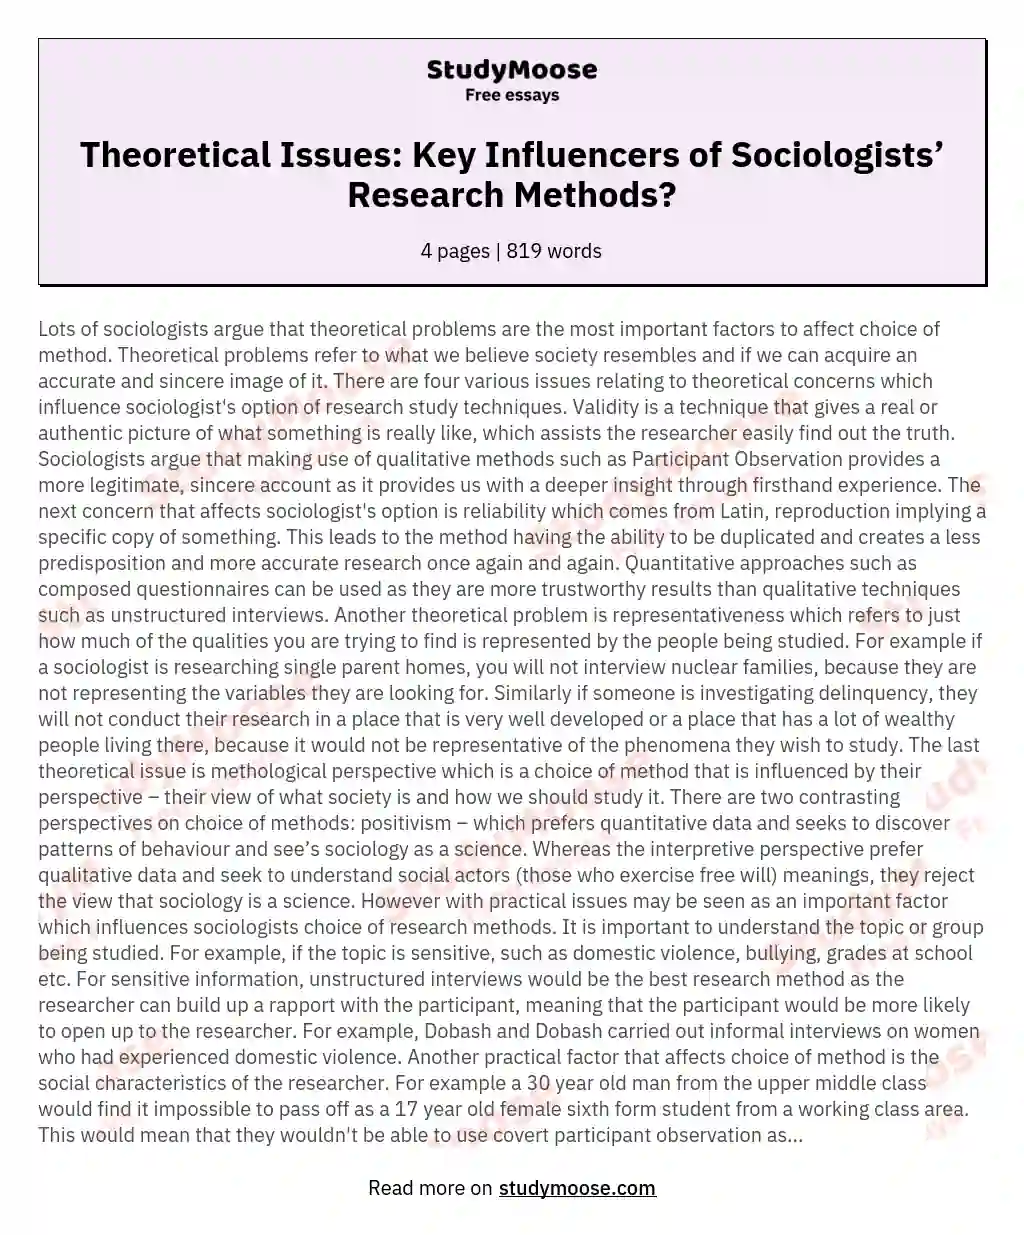 Theoretical Issues: Key Influencers of Sociologists’ Research Methods? essay